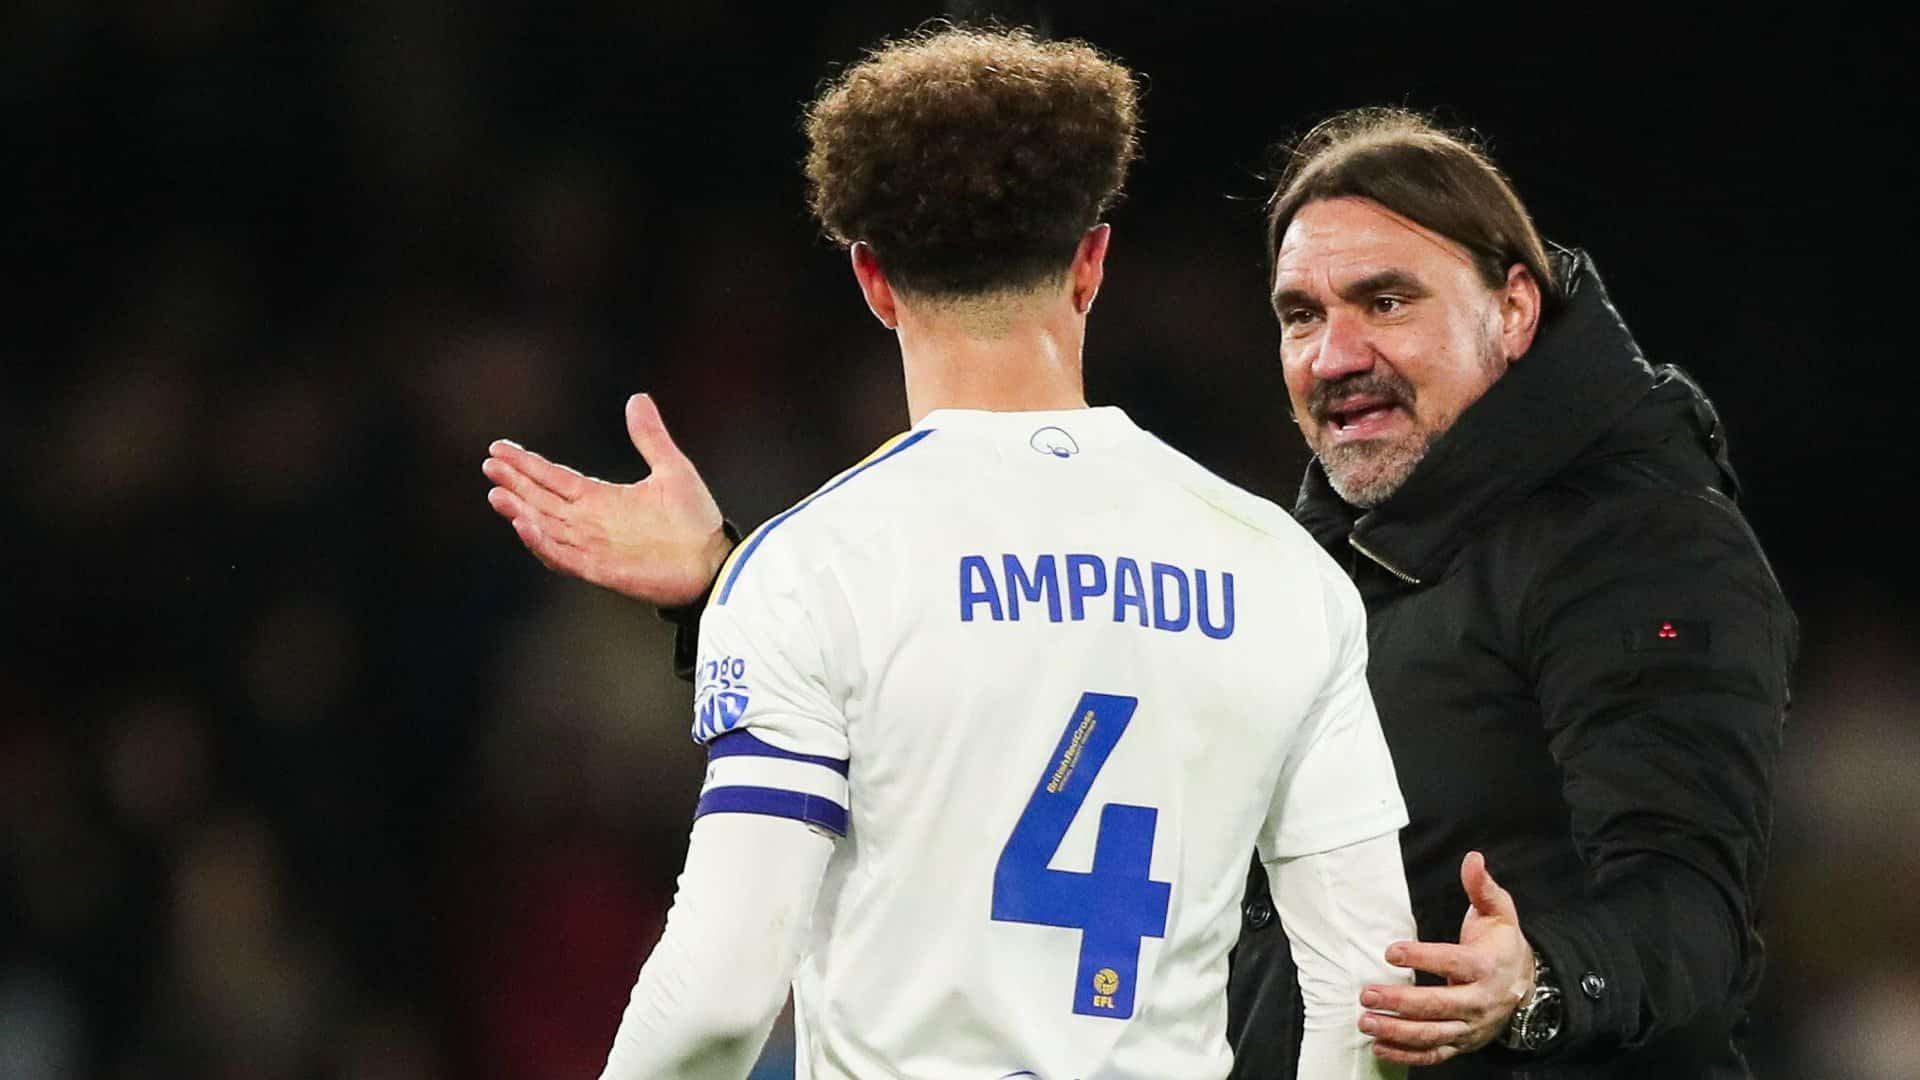 Daniel Farke explaining things to Ethan Ampadu at the end of Leeds' game at Watford